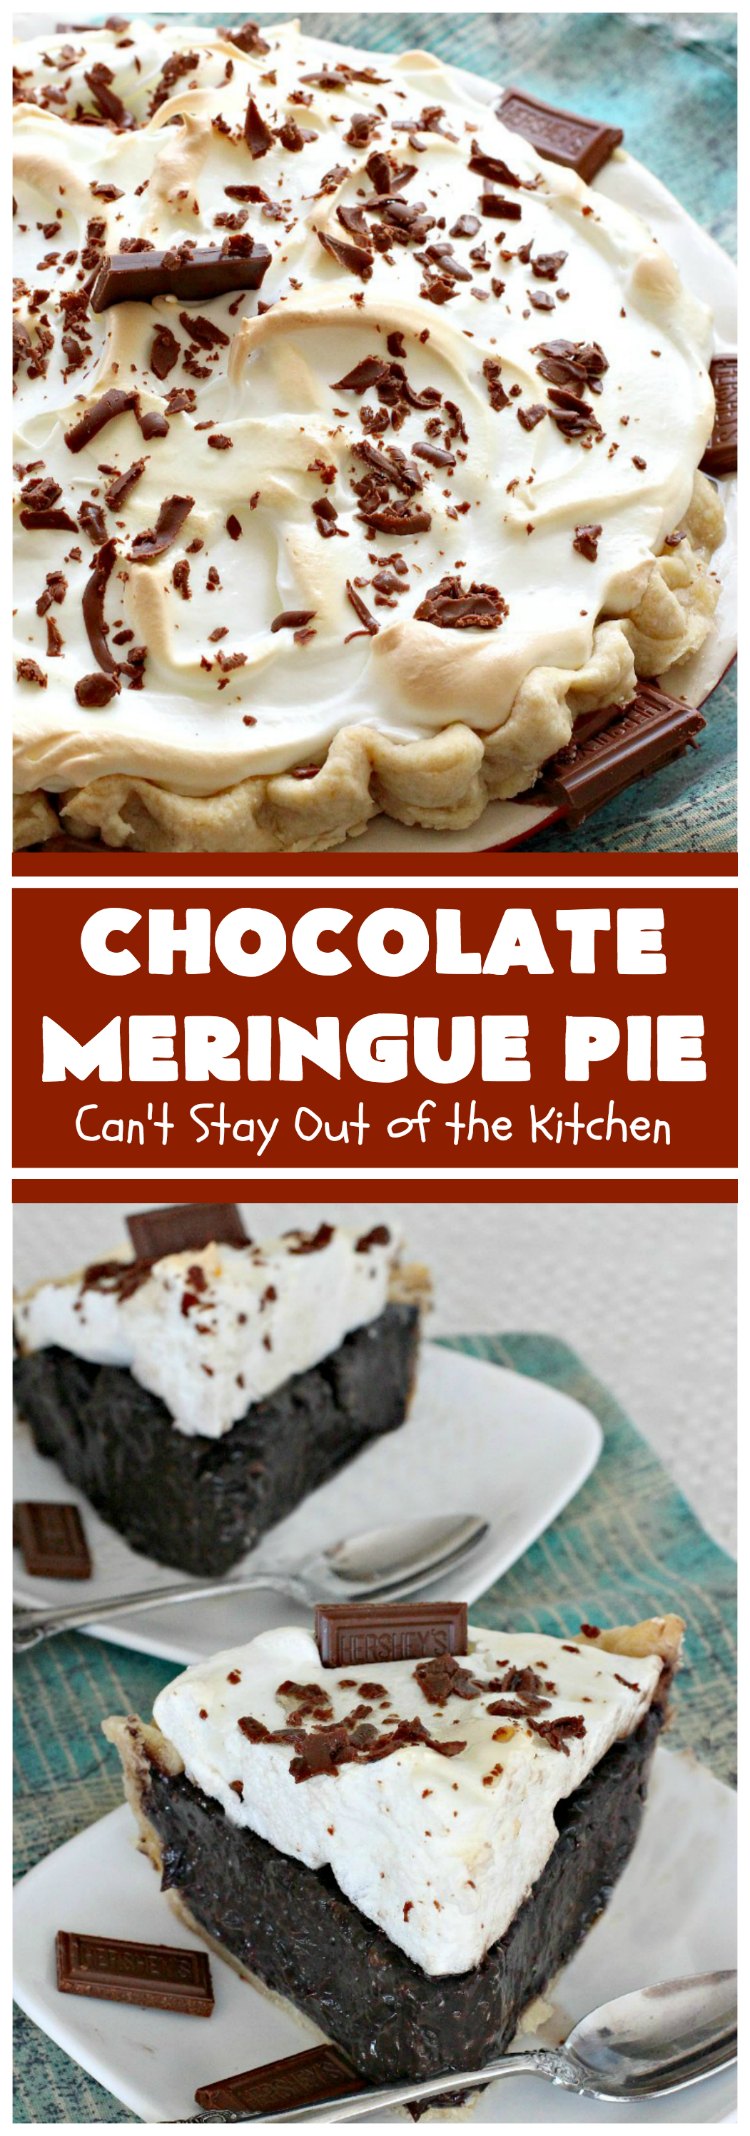 Chocolate Meringue Pie | Can't Stay Out of the Kitchen